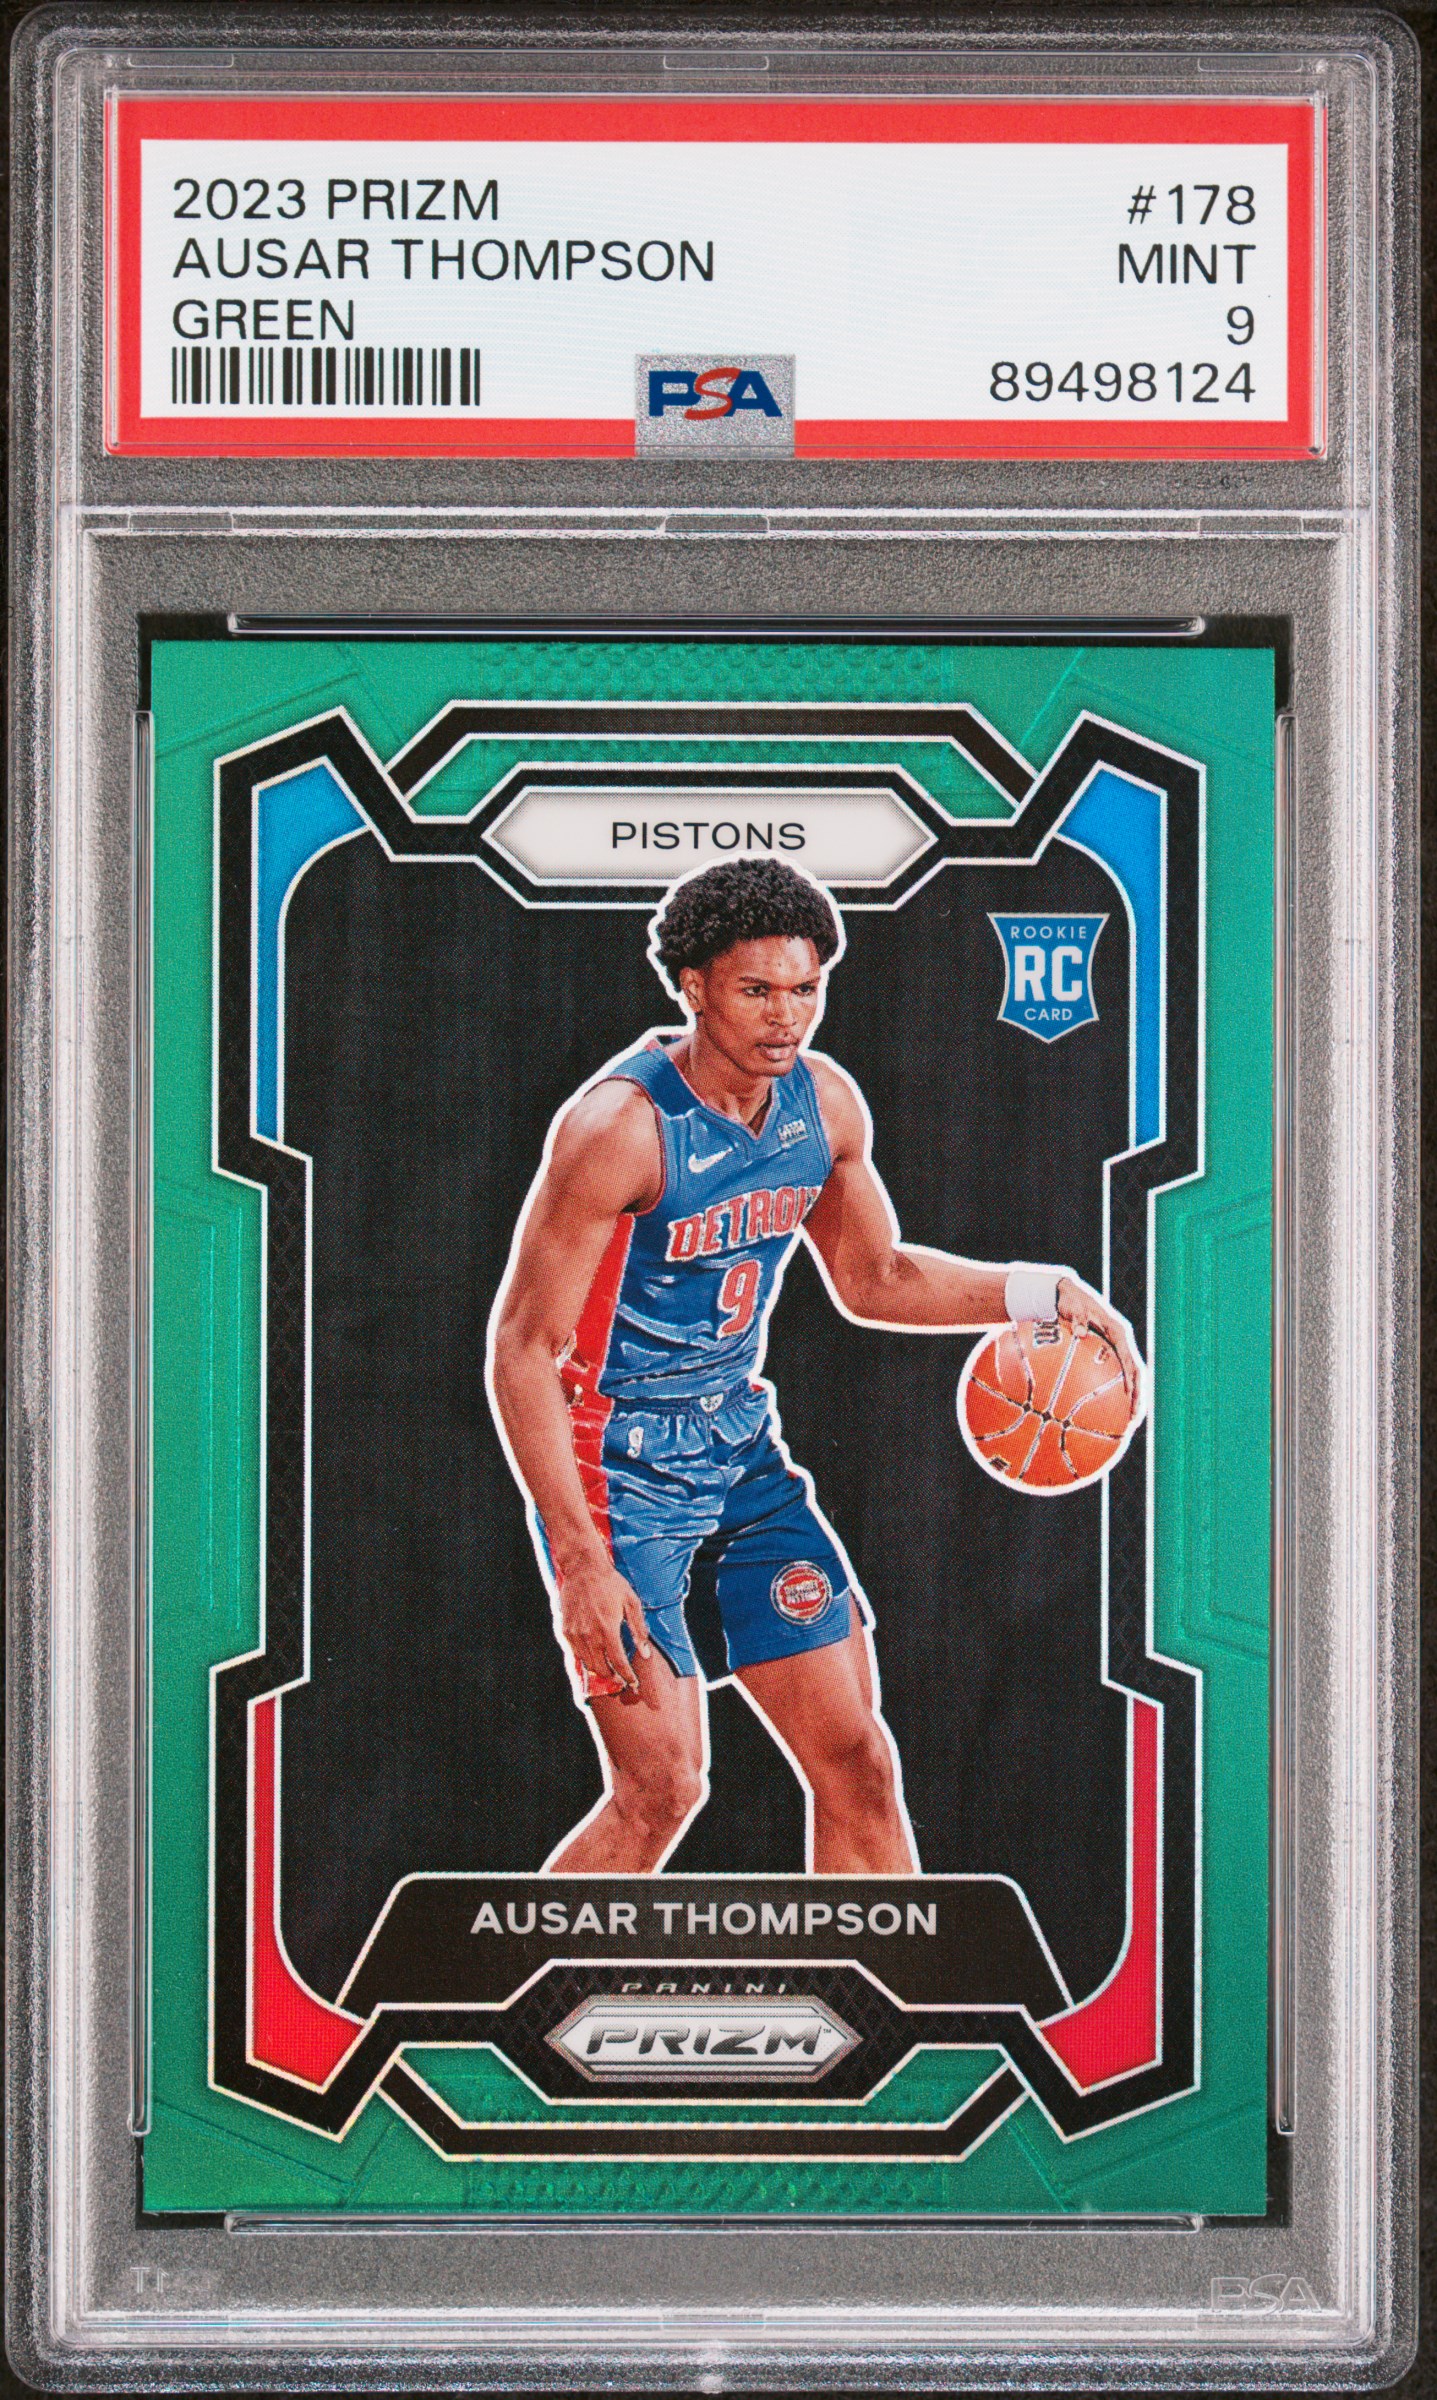 Ausar Thompson 2023 Prizm #178 Green Price Guide - Sports Card Investor